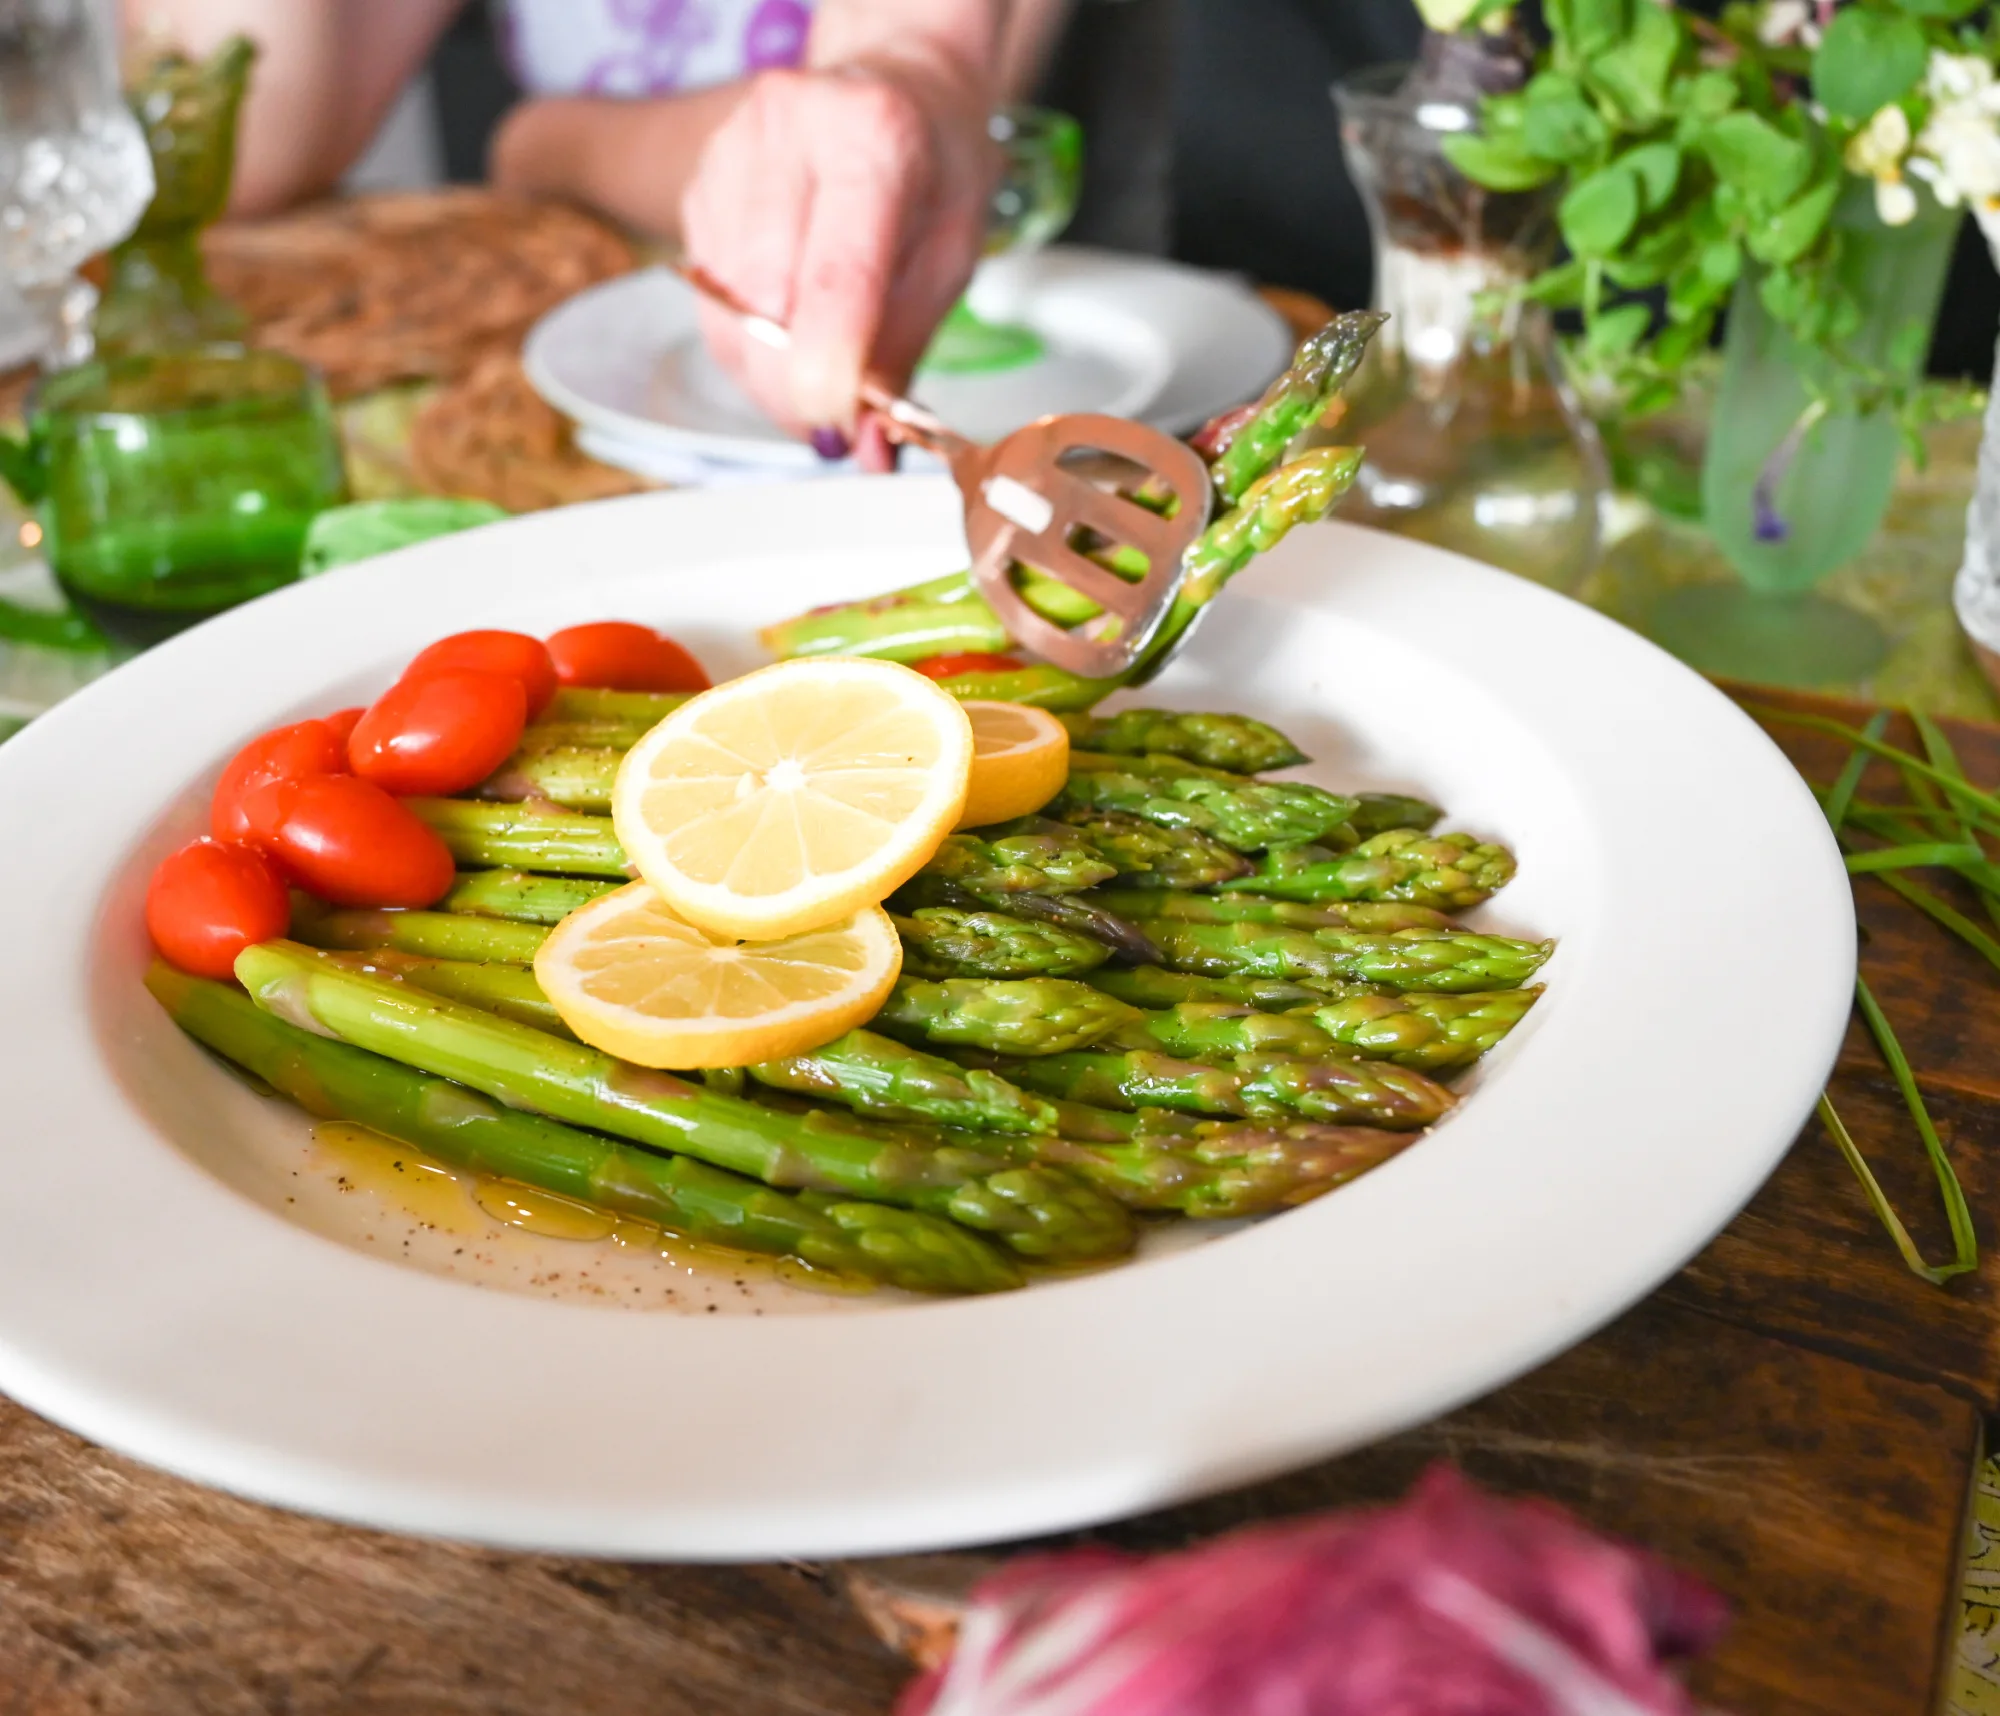  low carb asparagus salad being served with copper salad tongs